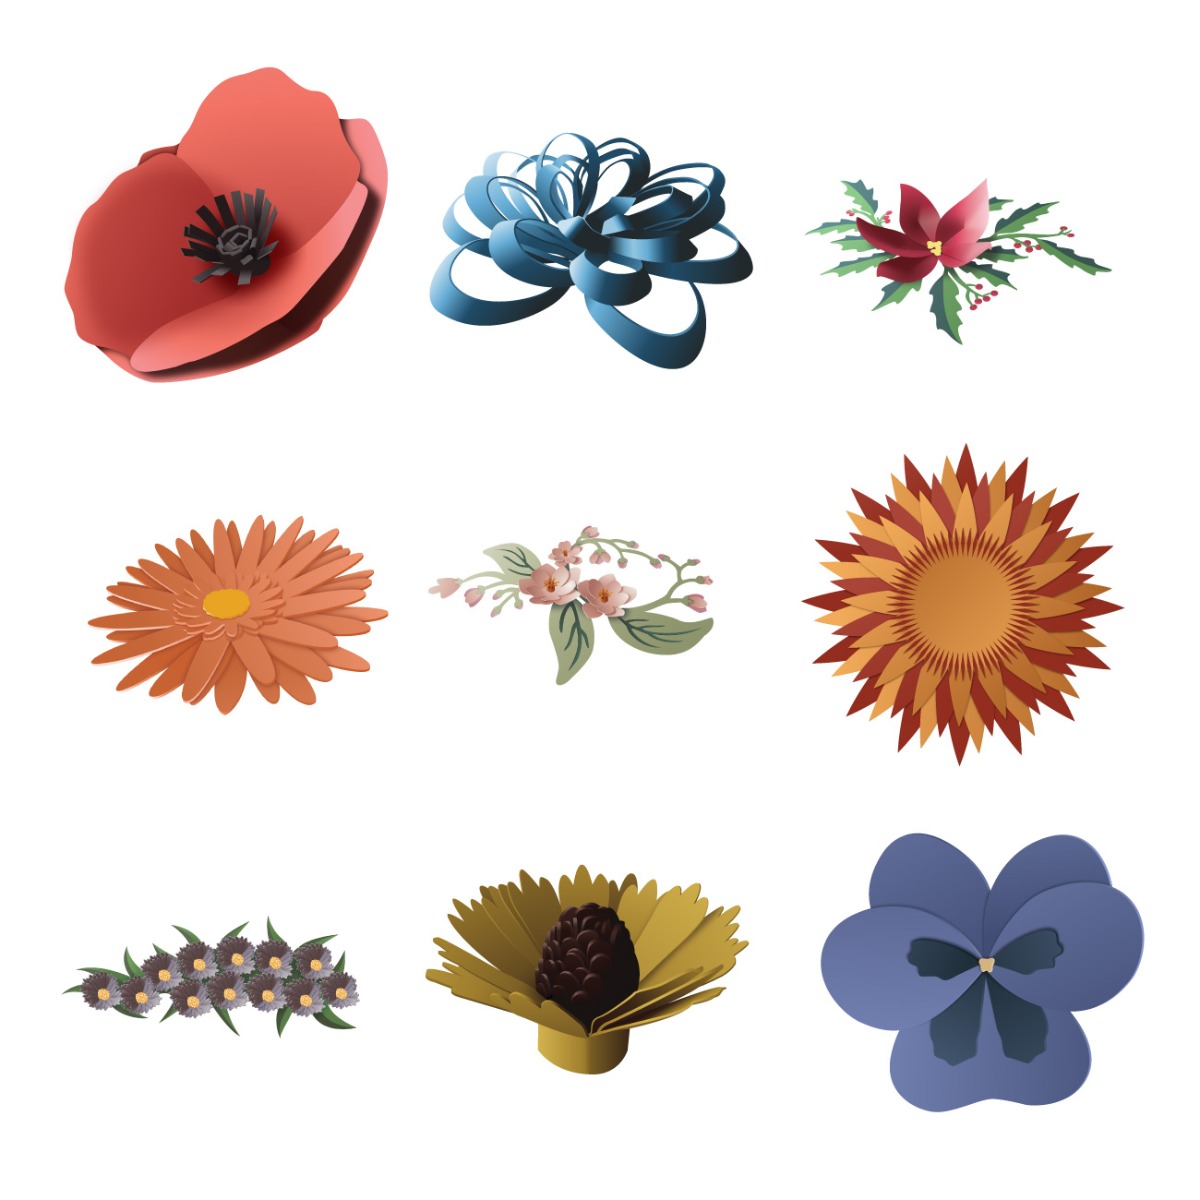 What Are The Flowers In Cricuts 3D Floral Home Decor